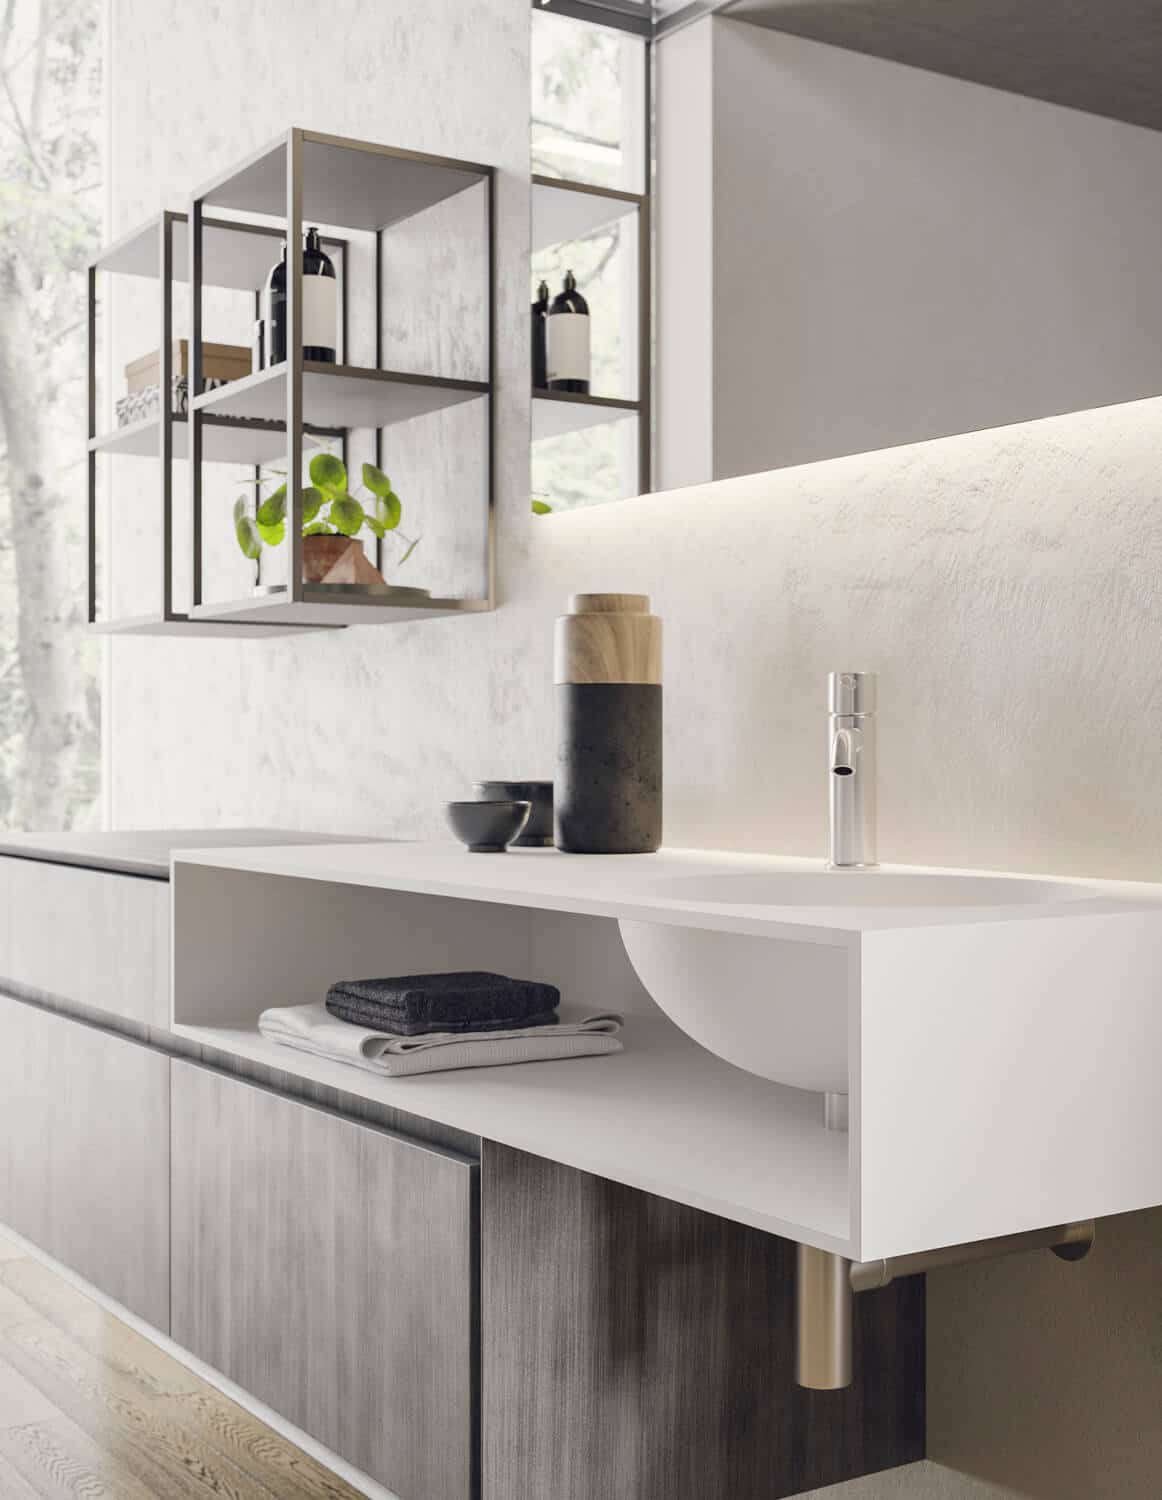 Cabinets in Acciaio metal. Open shelving units: Tortora matte lacquered metal. Washbasin and top: White matte teknorit.